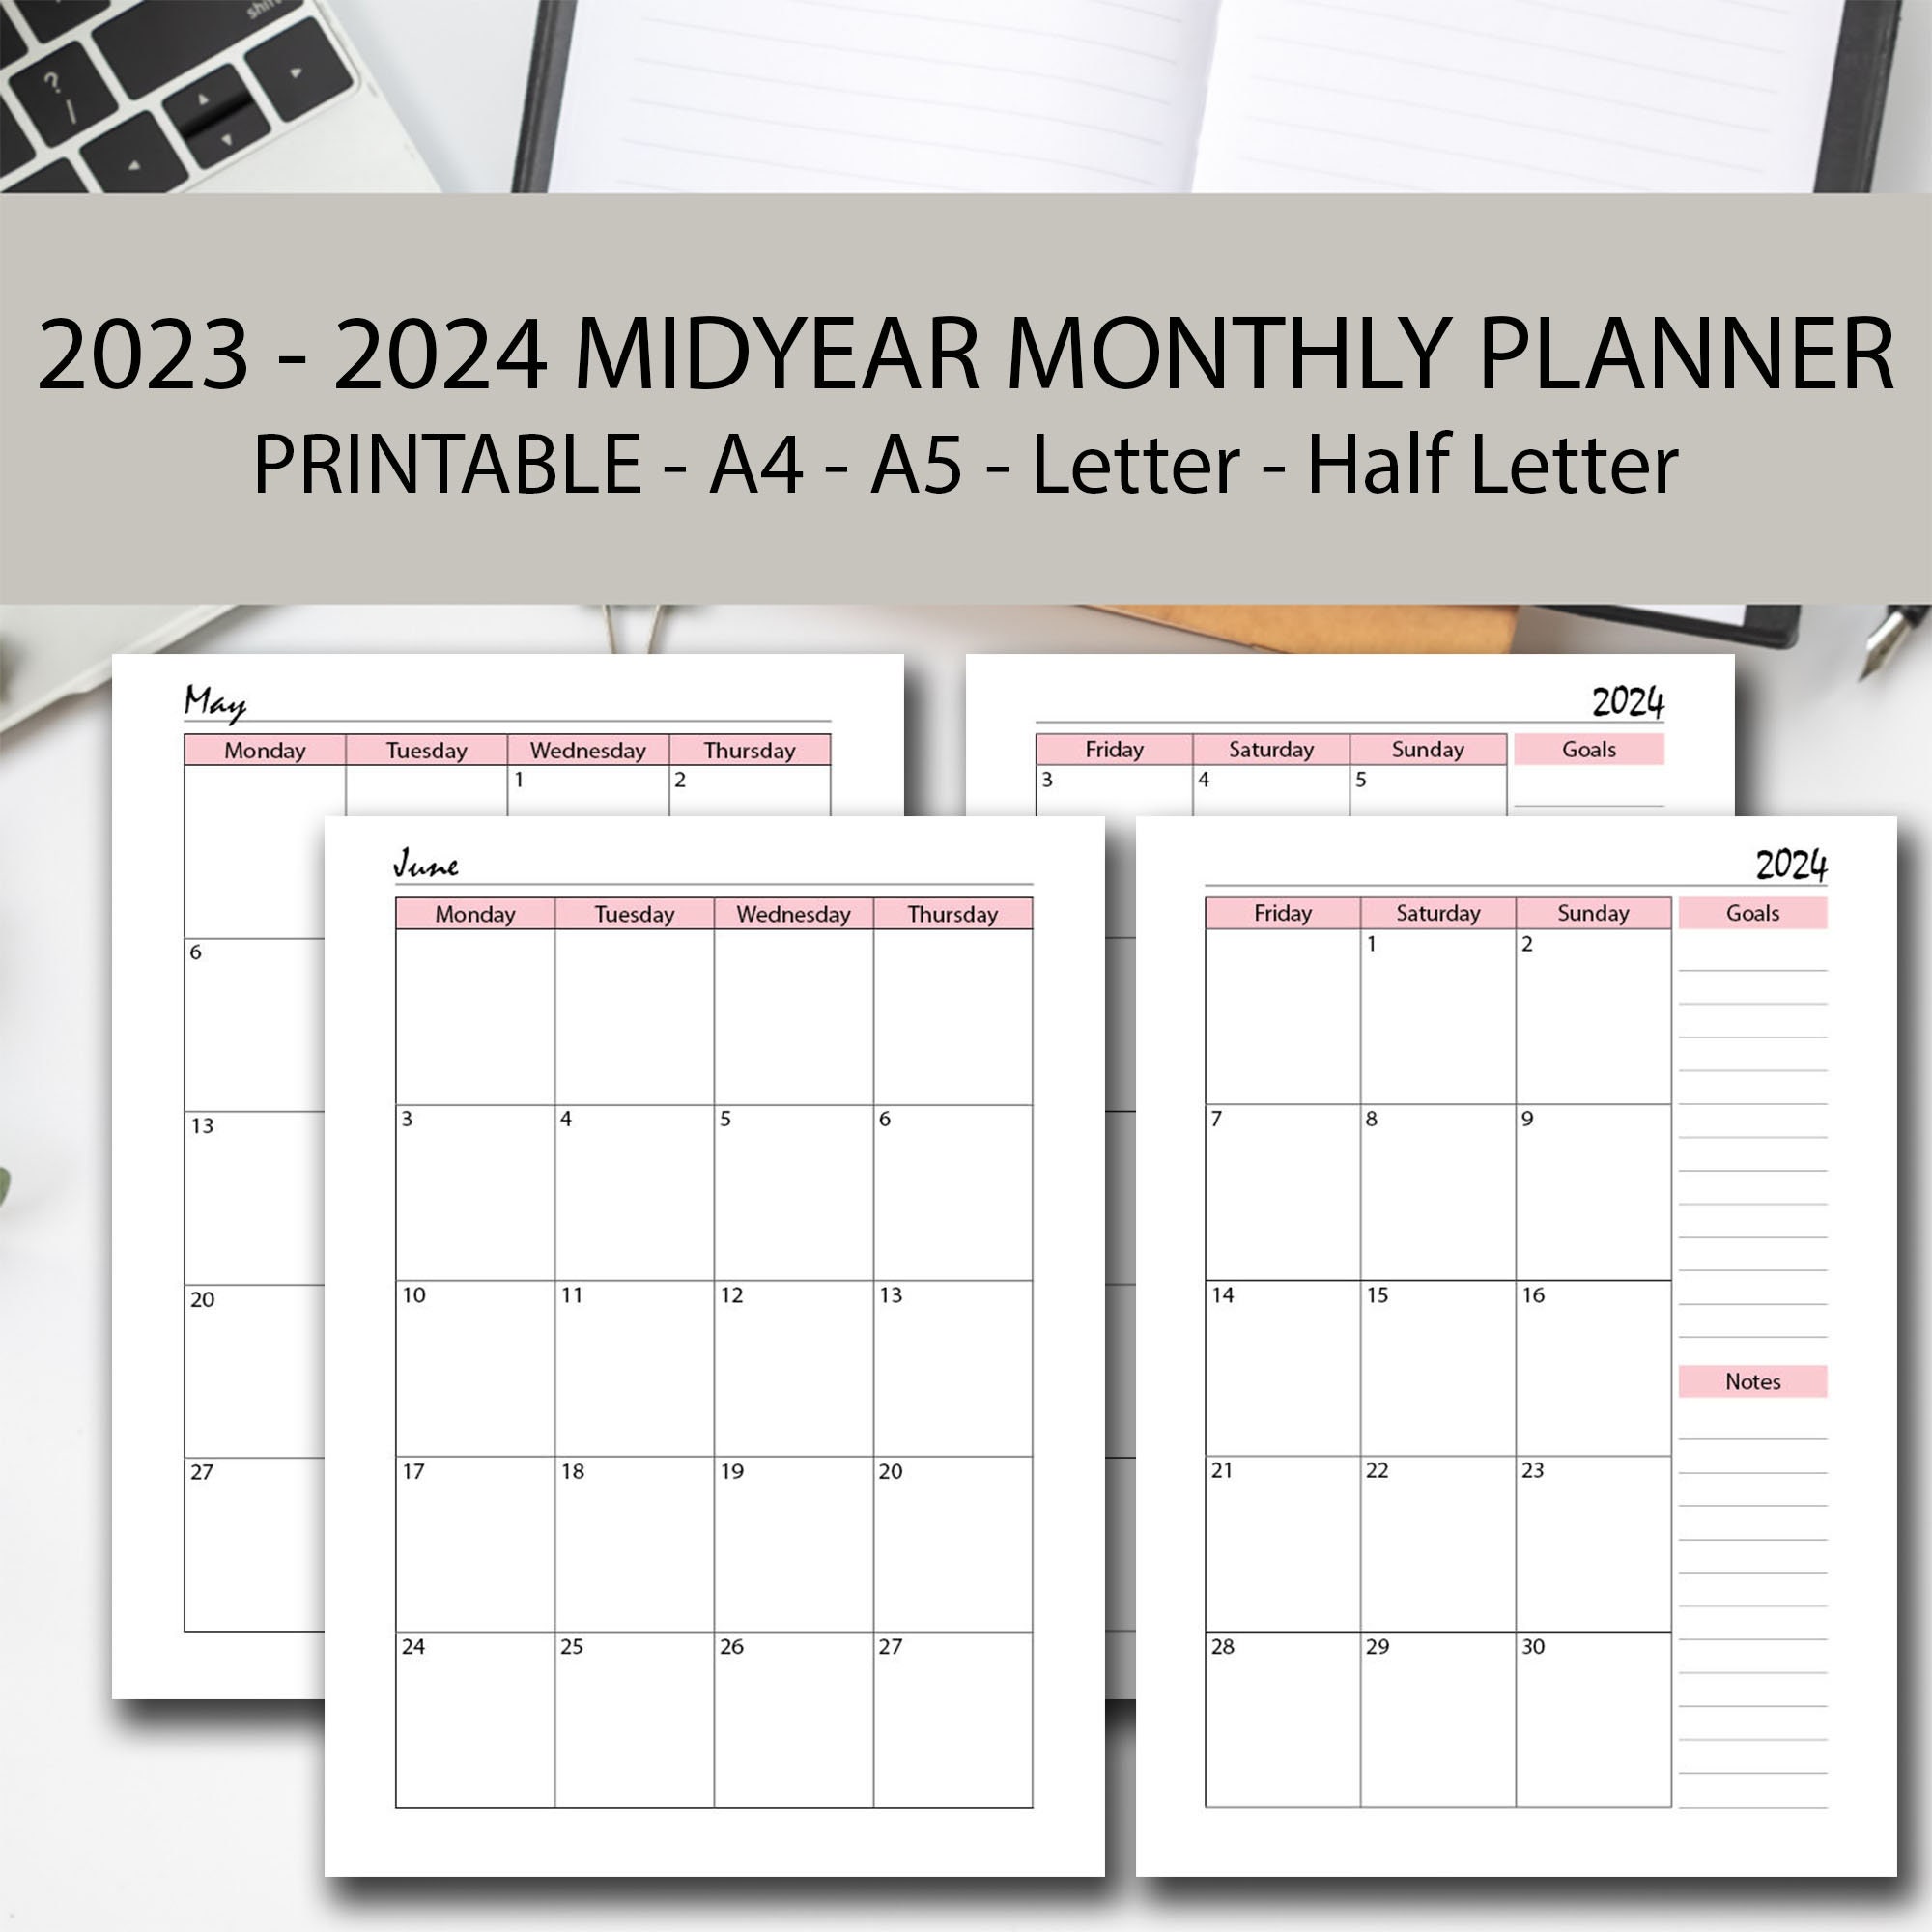 20232024 Monthly Midyear Planner Printable PINK Month on 2 Etsy